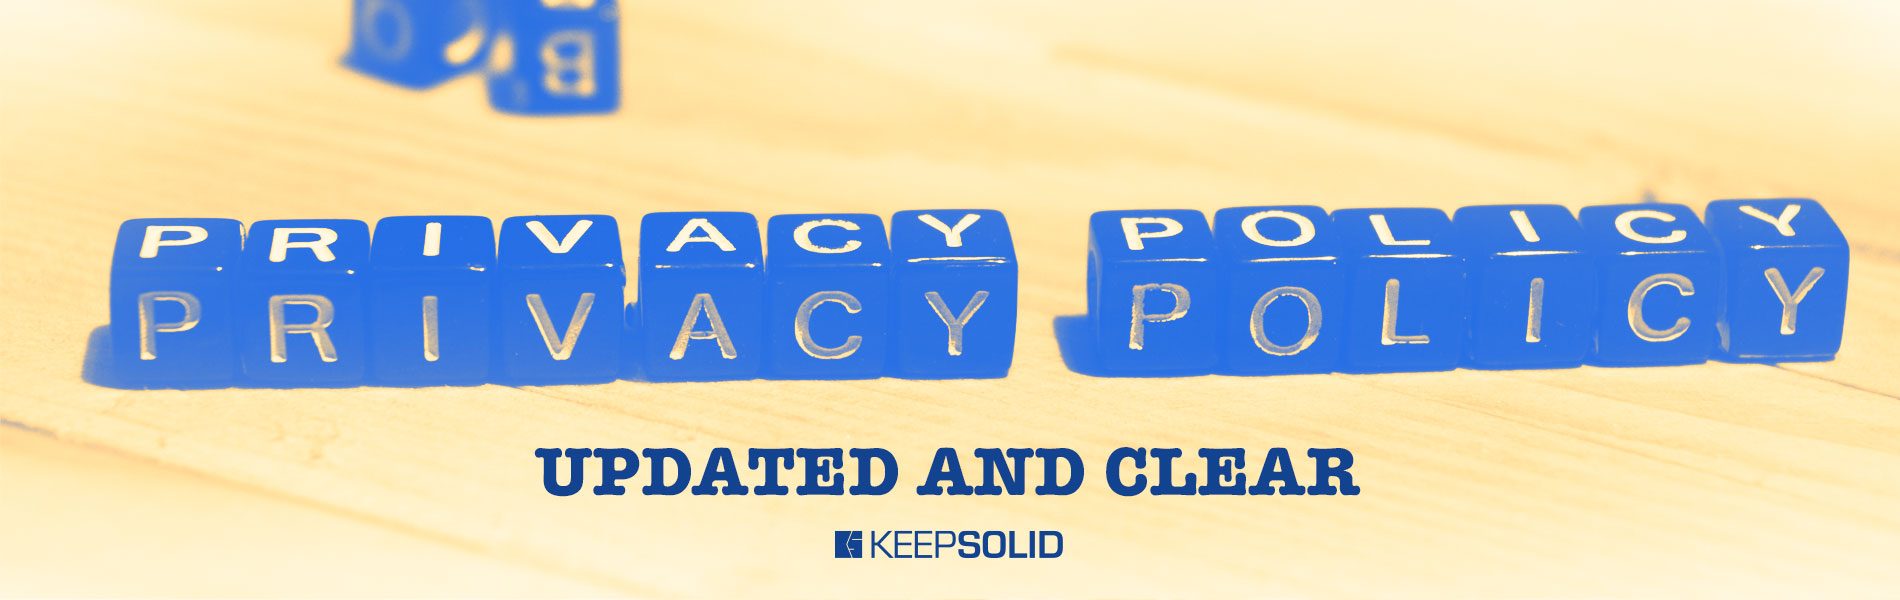 Privacy policy message written on wooden blocks, illustrating the update of KeepSolid Privacy Policy